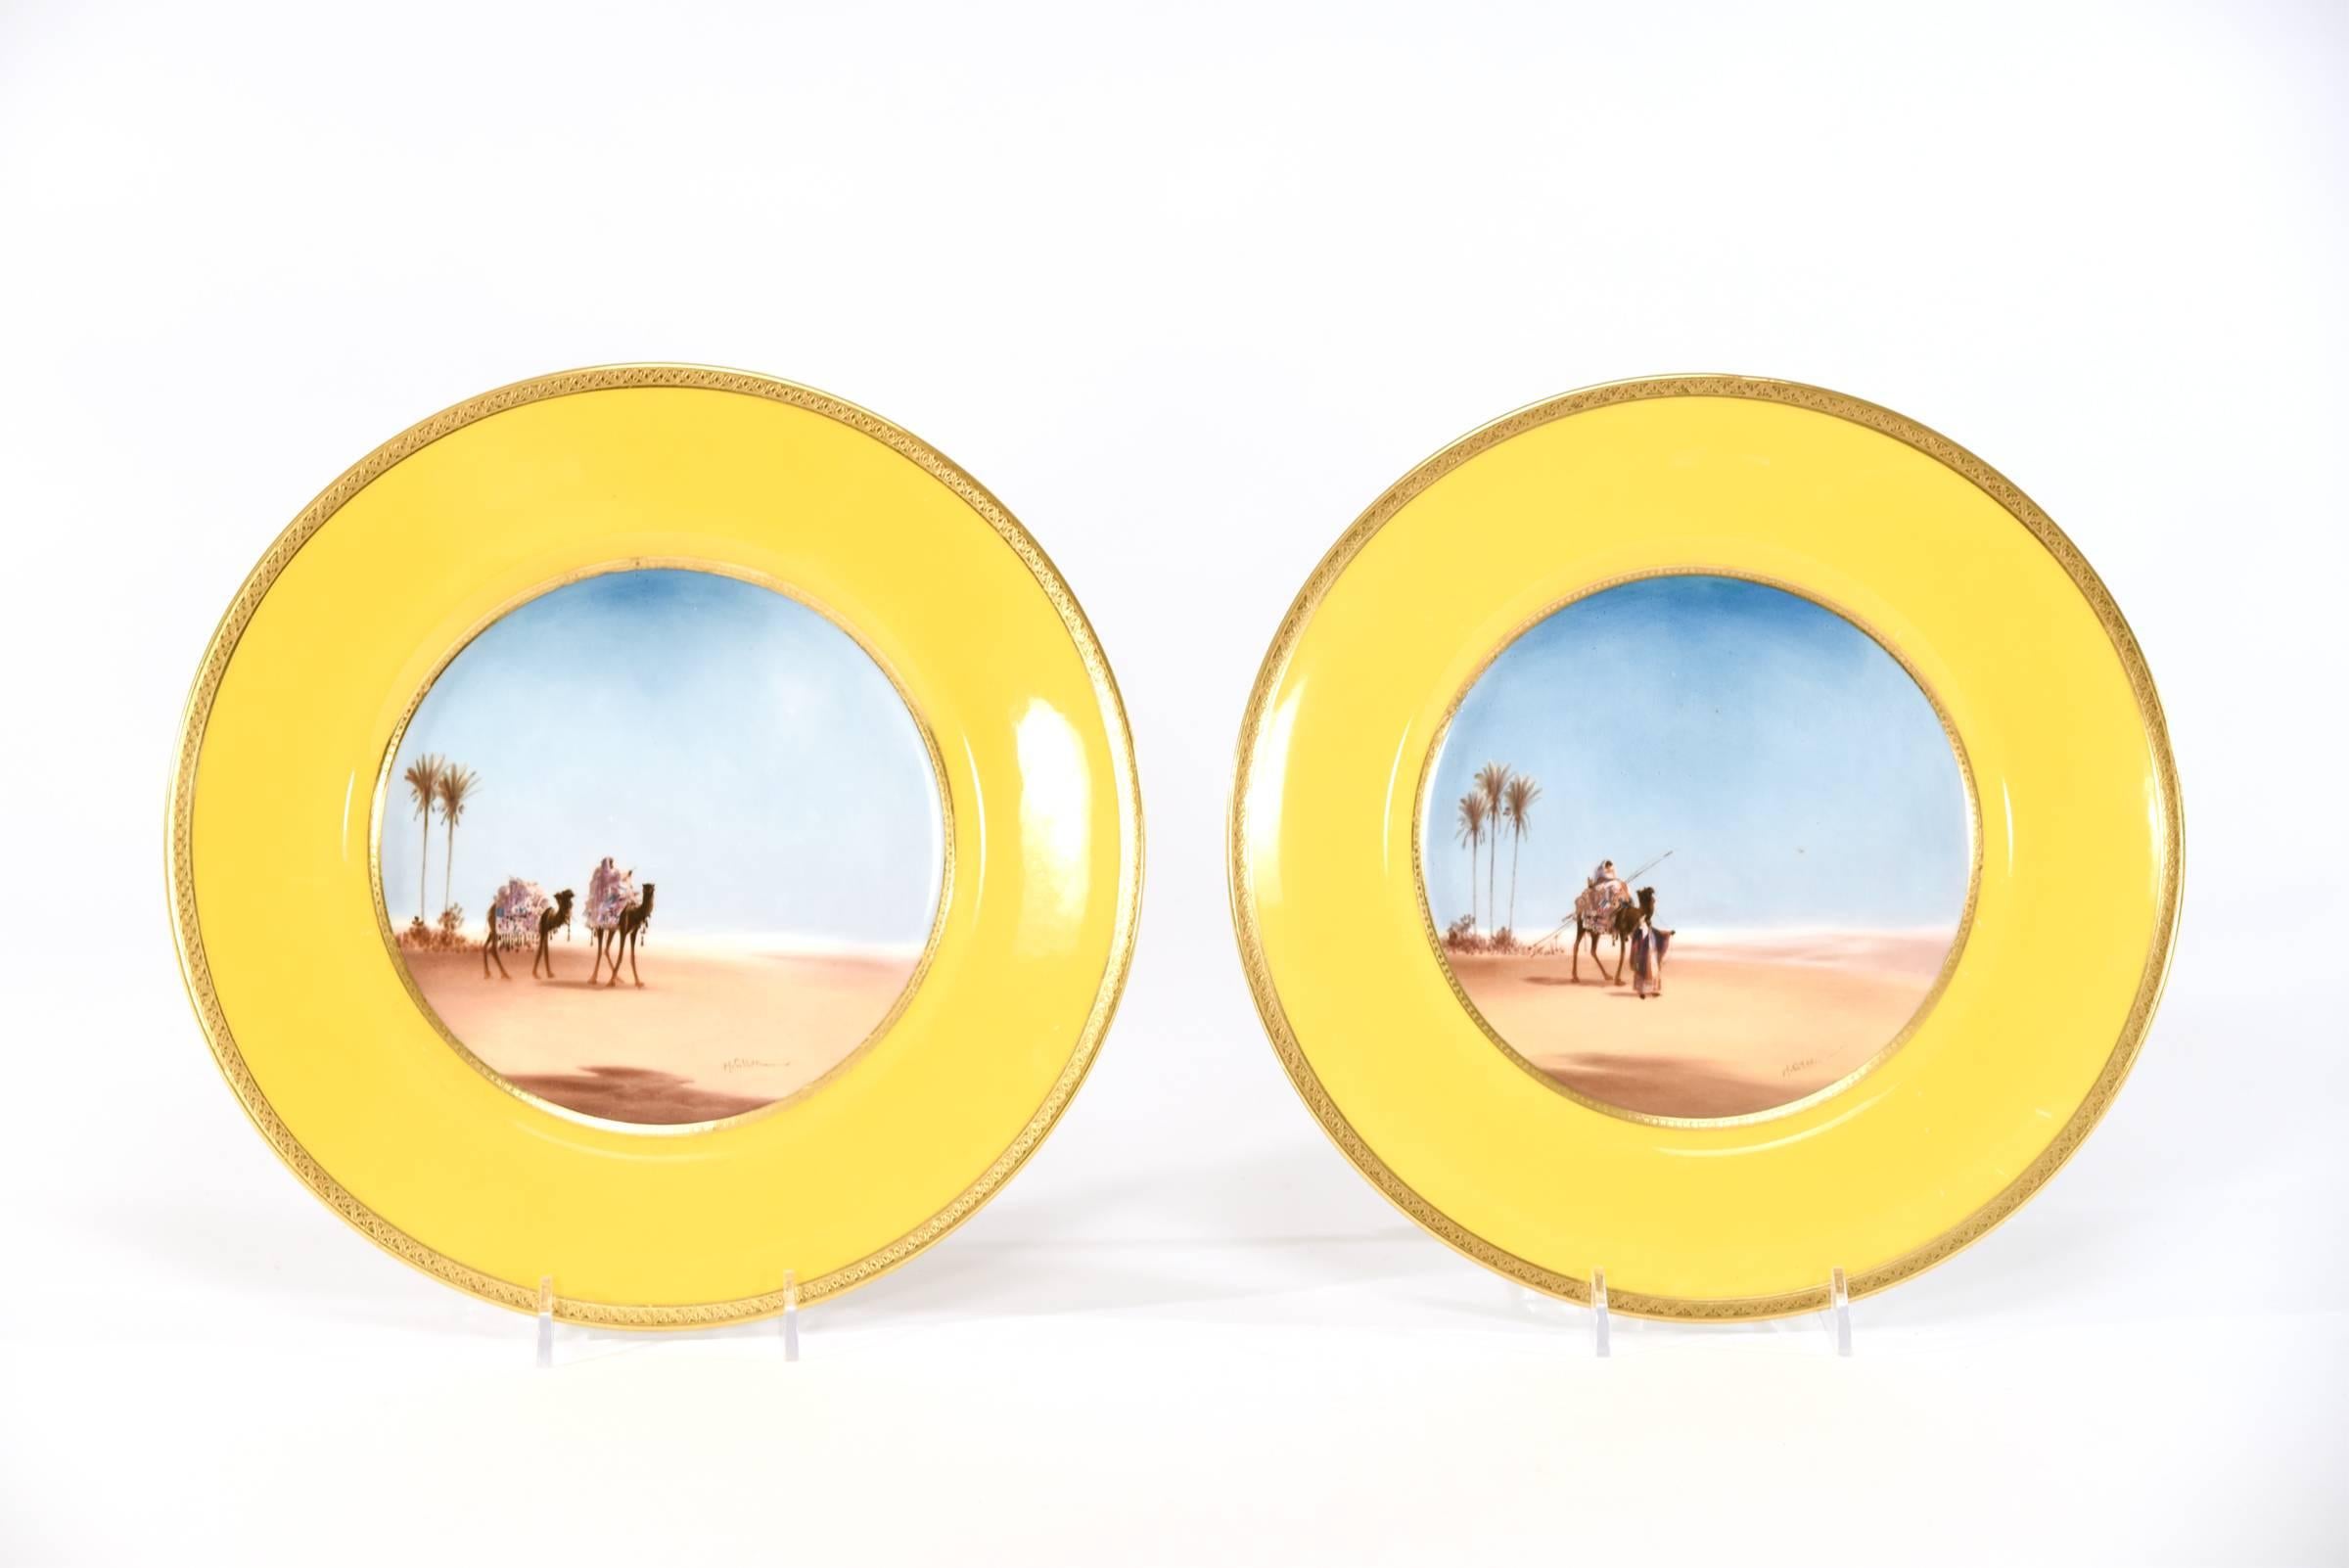 English 12 Royal Doulton Hand Painted Plates Signed H. Allen Desert Scenes with Camels